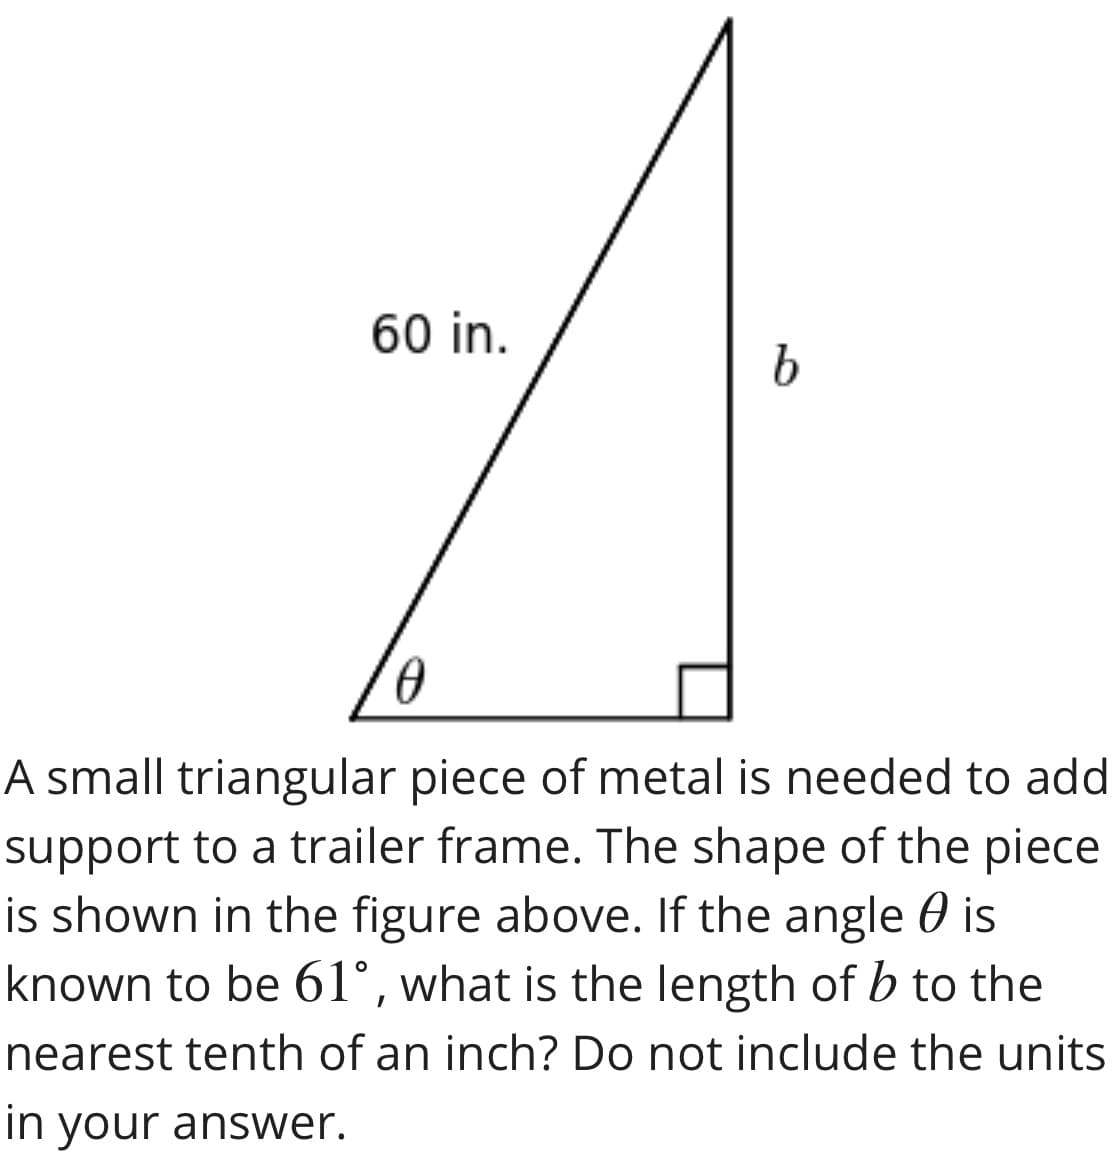 60 in.
A small triangular piece of metal is needed to add
support to a trailer frame. The shape of the piece
is shown in the figure above. If the angle 0 is
known to be 61°, what is the length of b to the
nearest tenth of an inch? Do not include the units
in your answer.
